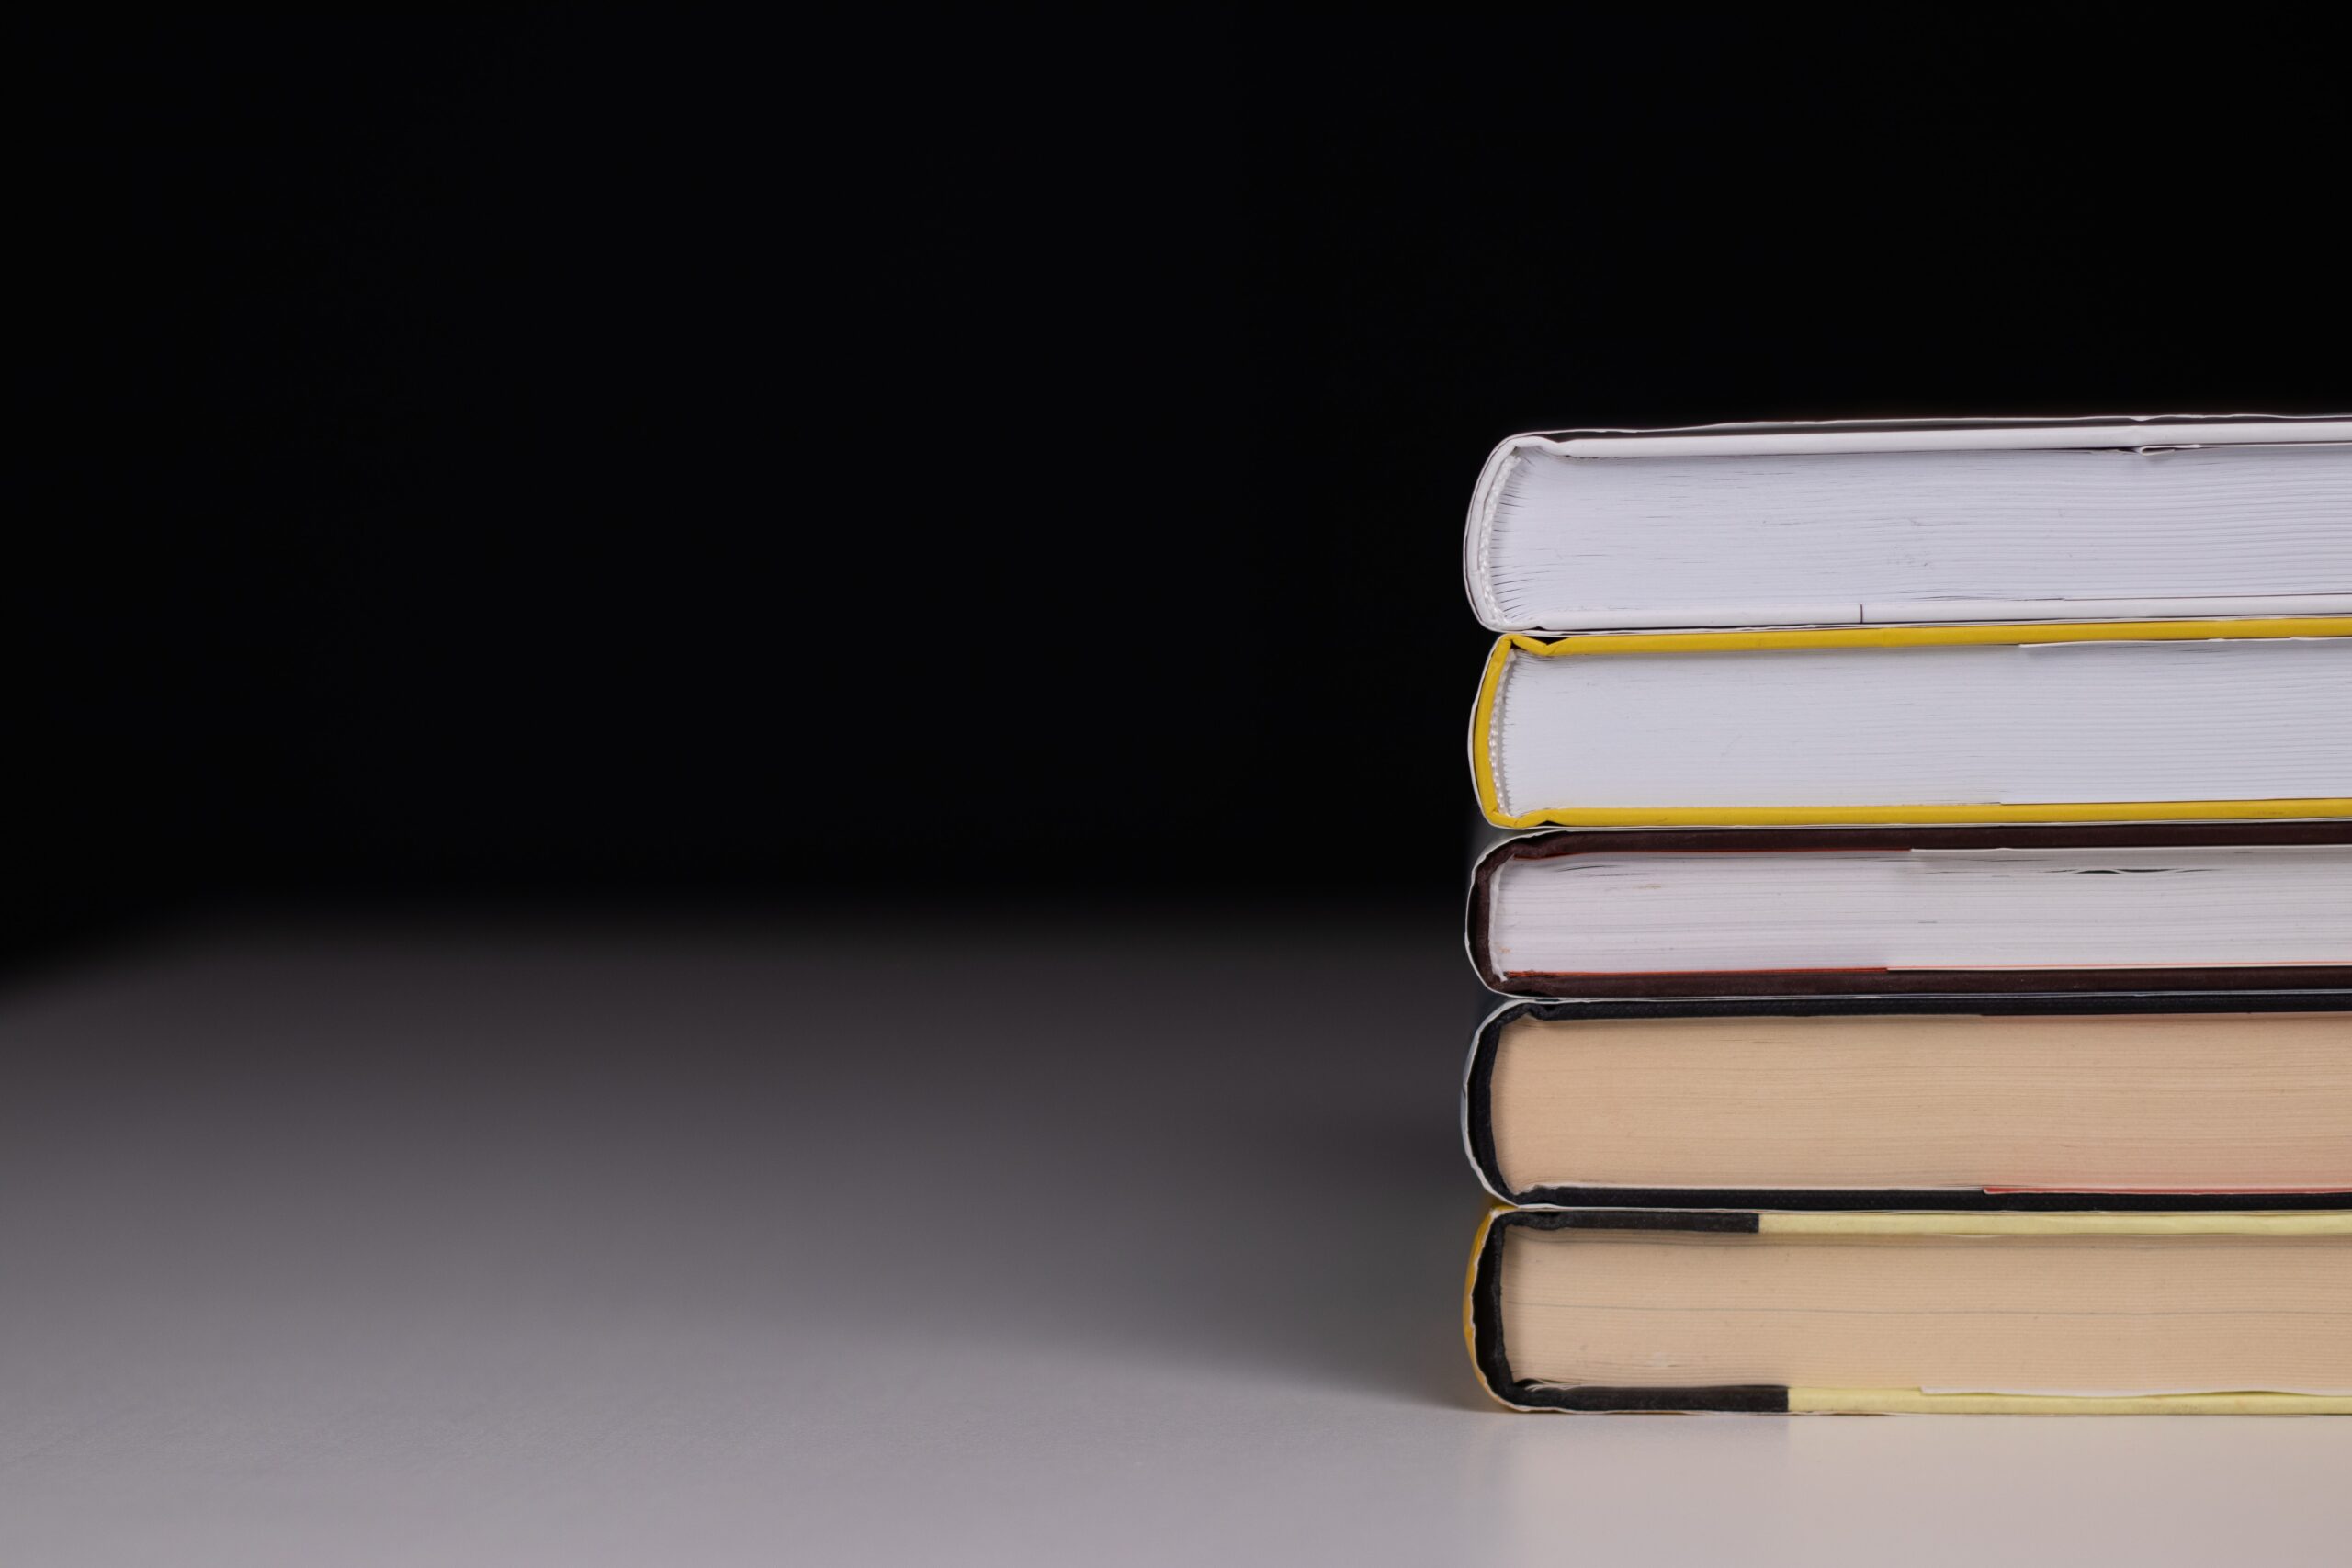 A pile of five books on the table. Photo by dlxmedia.hu on Unsplash